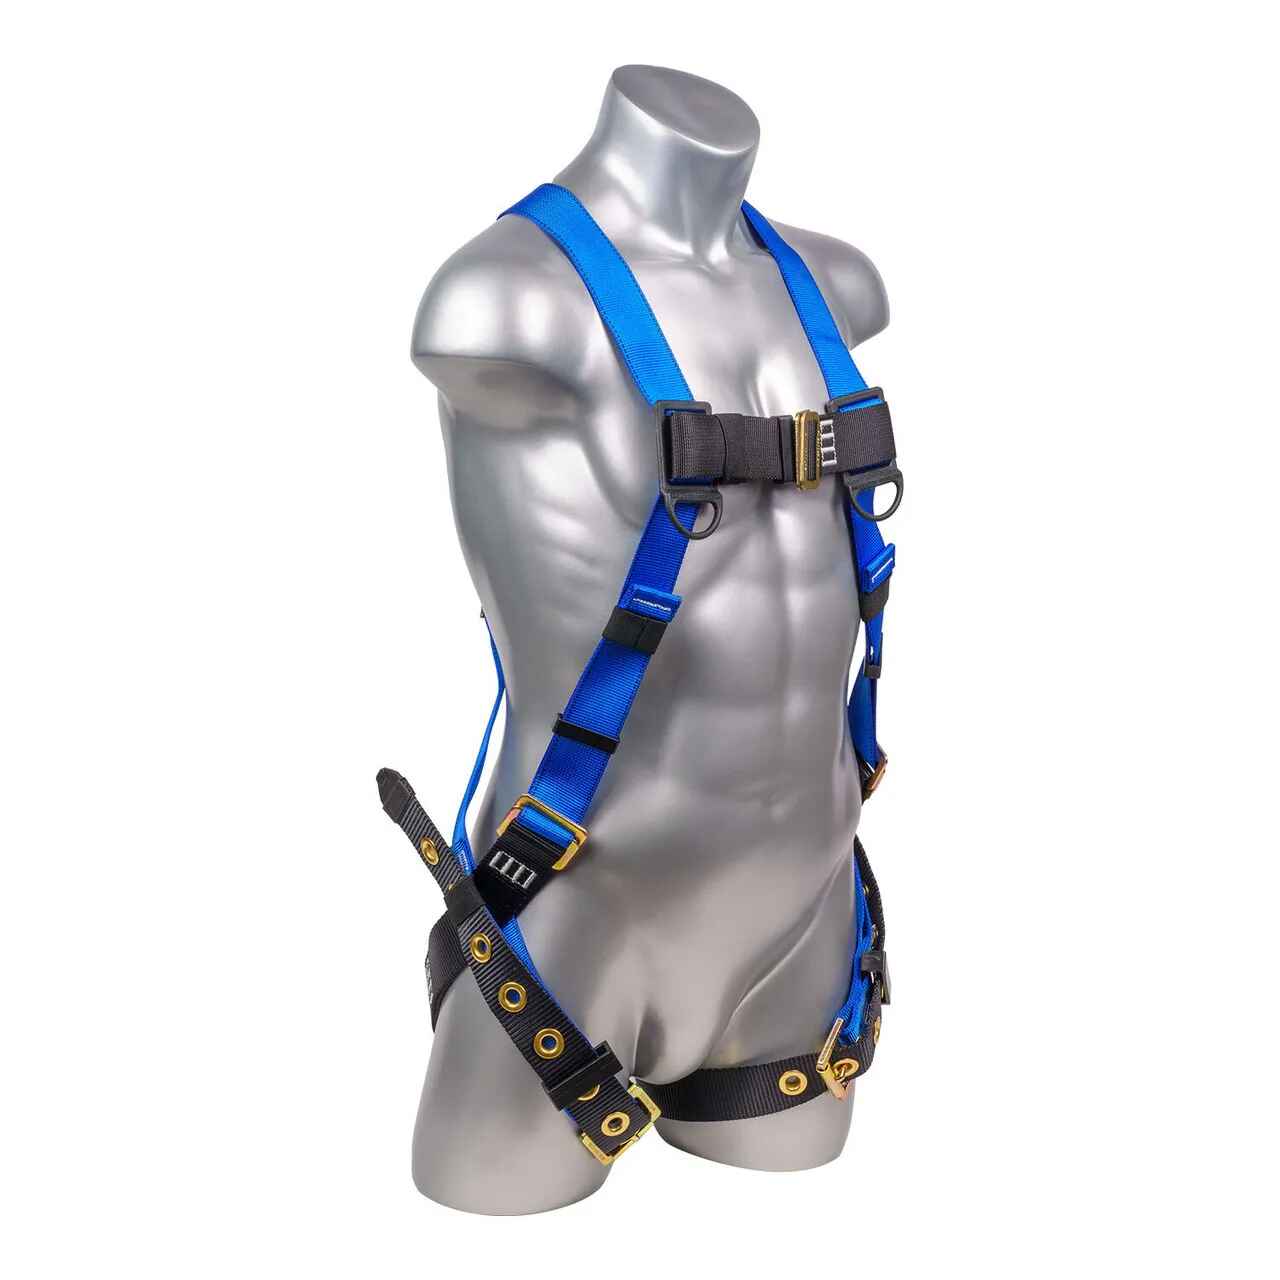 Construction Safety Harness 5 Point, Grommet Legs, Back D-Ring, Blue